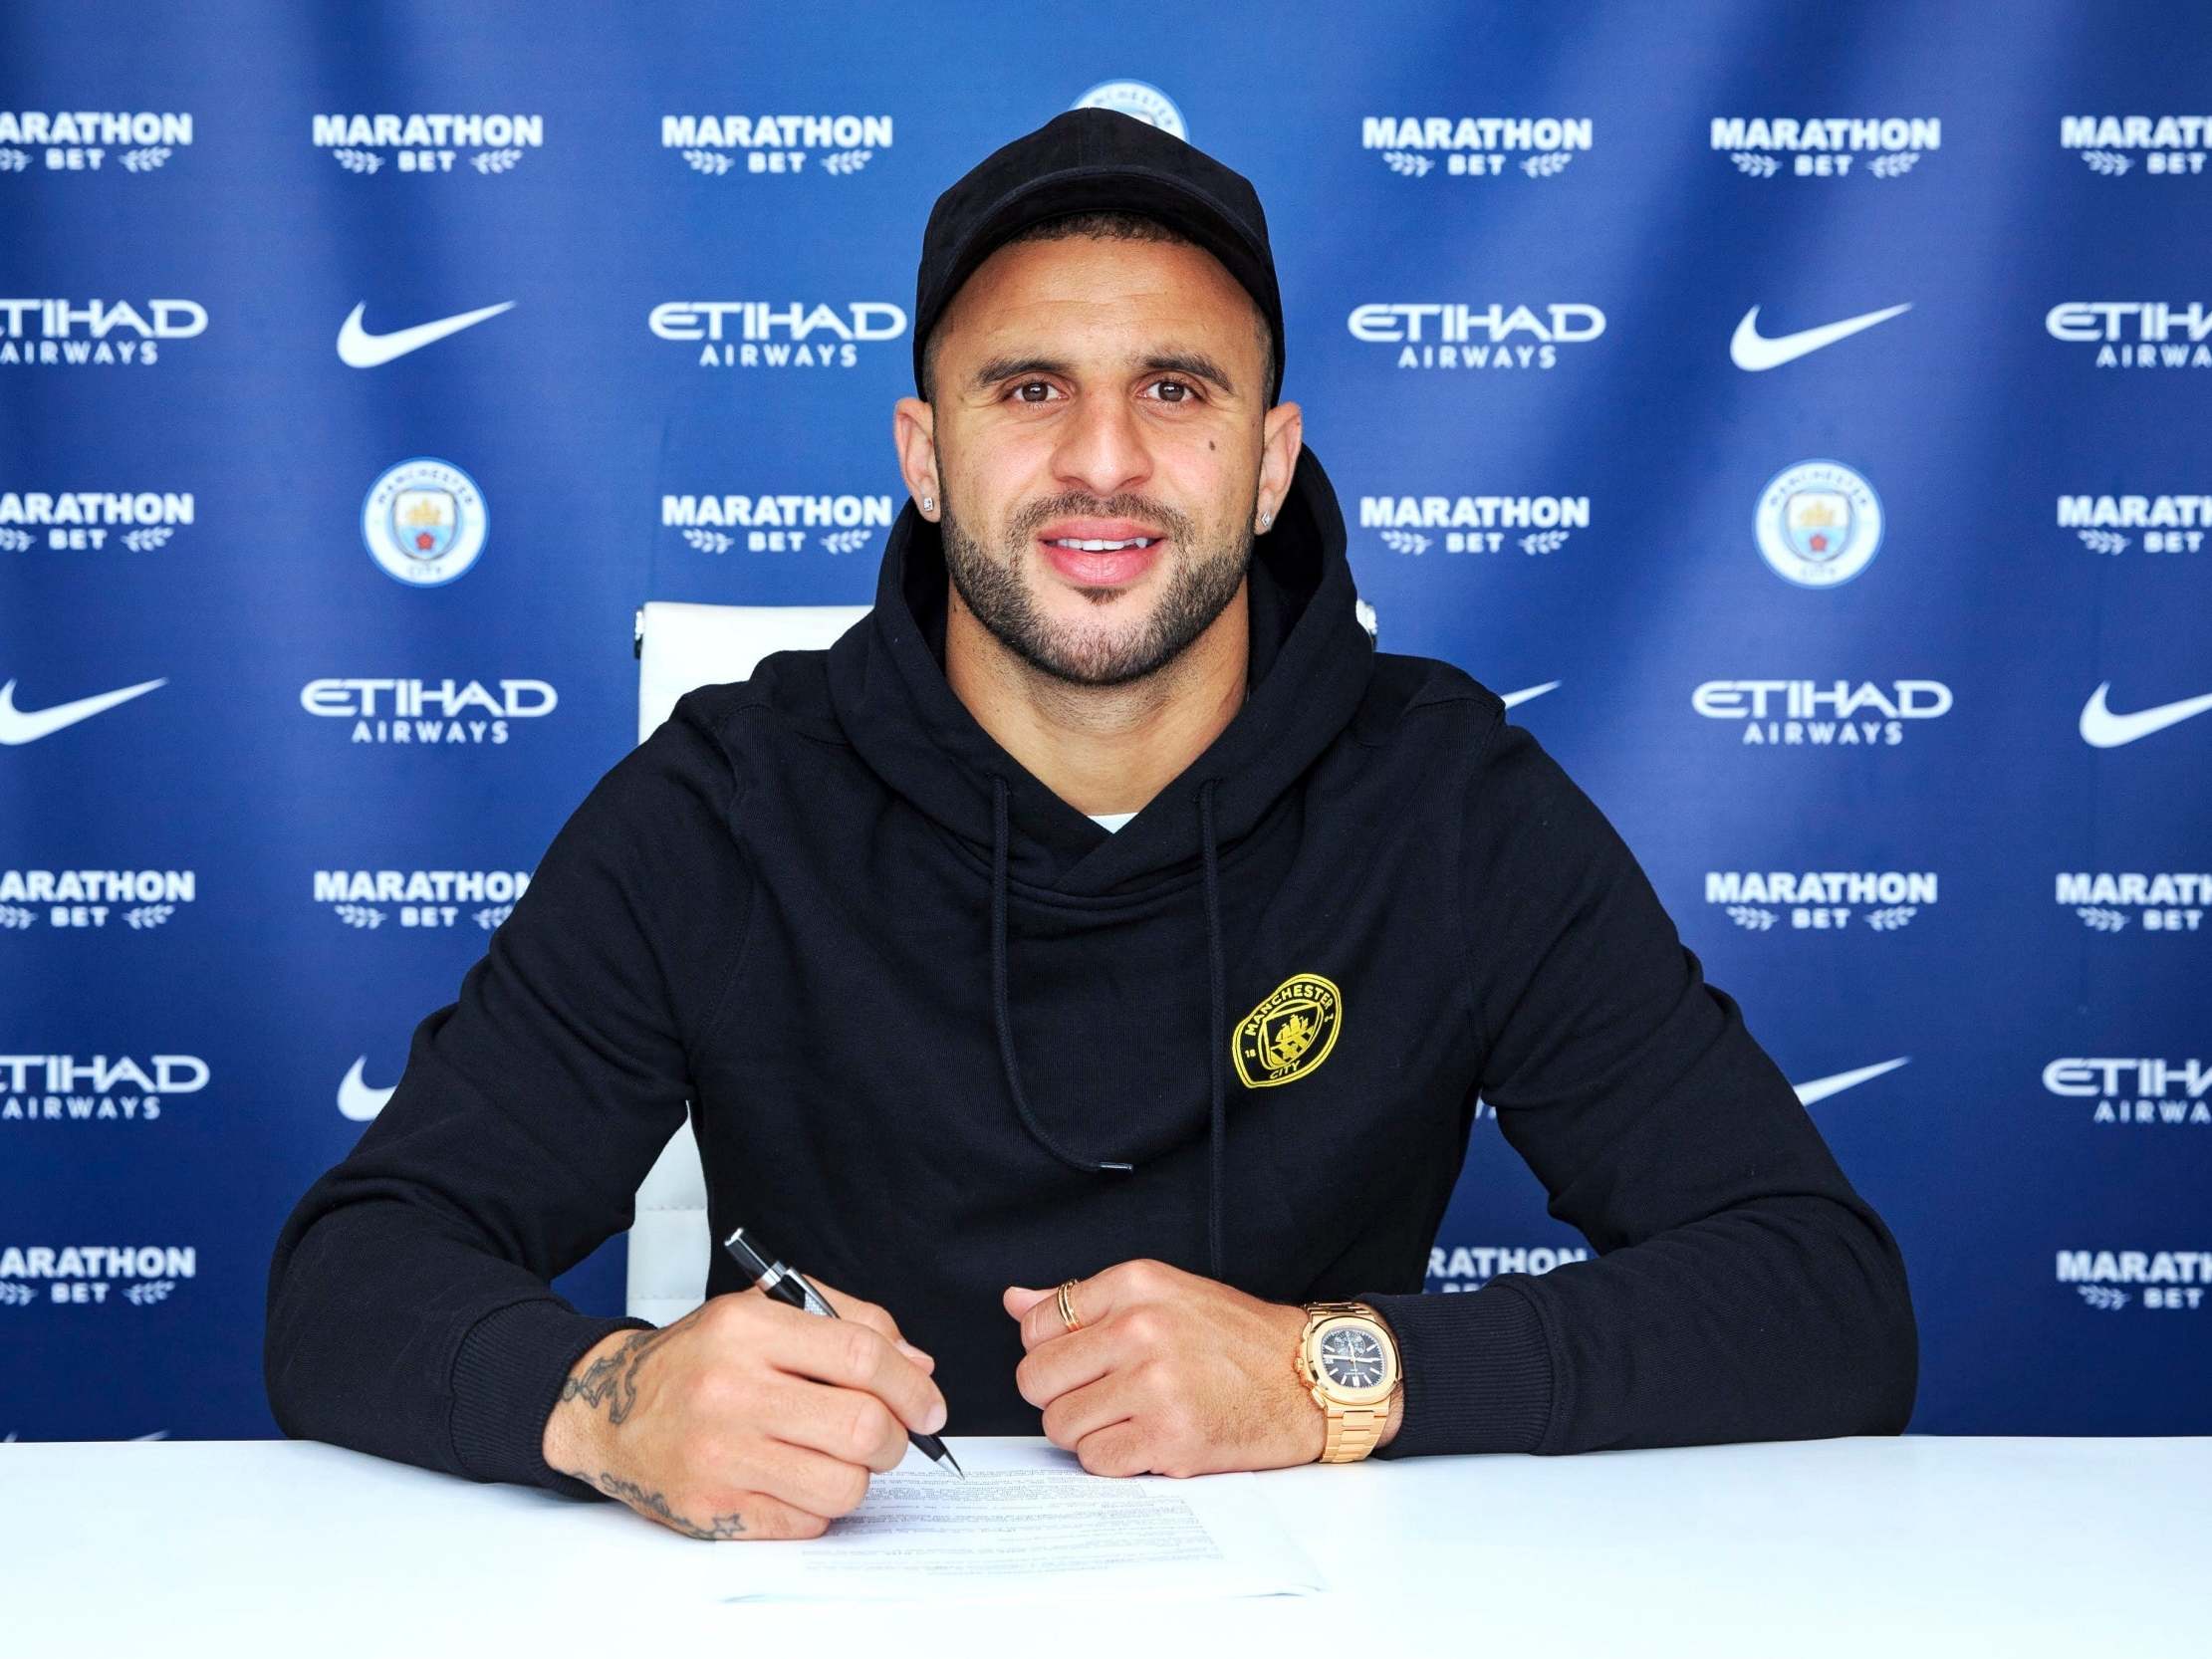 Kyle Walker has signed a new contract with Manchester City until 2024